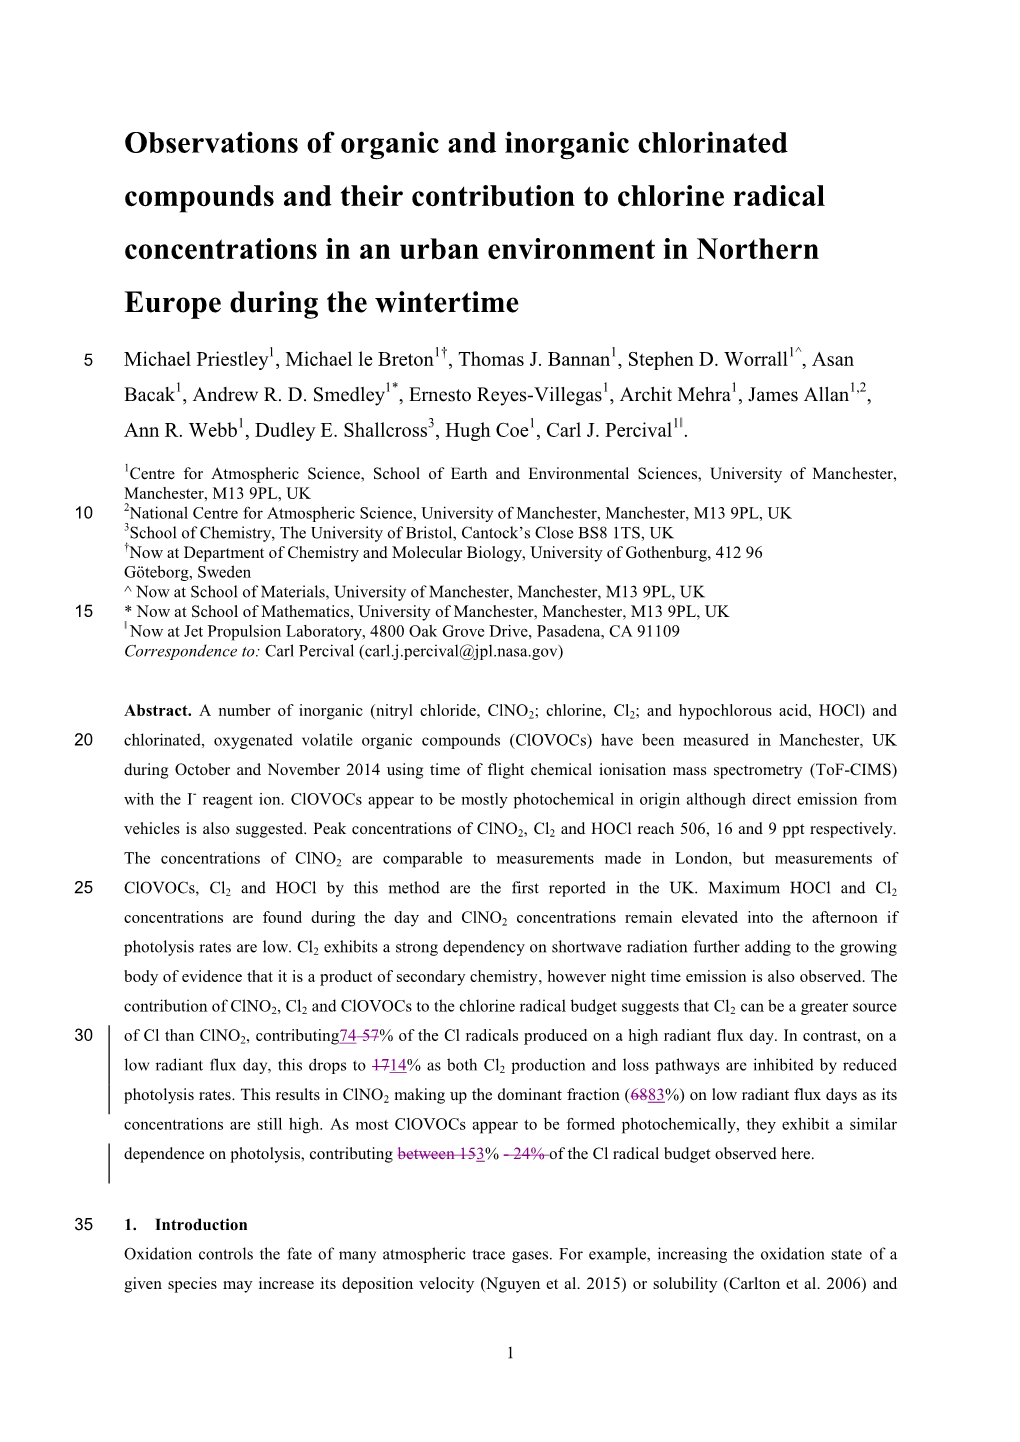 Observations of Organic and Inorganic Chlorinated Compounds and Their Contribution to Chlorine Radical Concentrations in an Urba